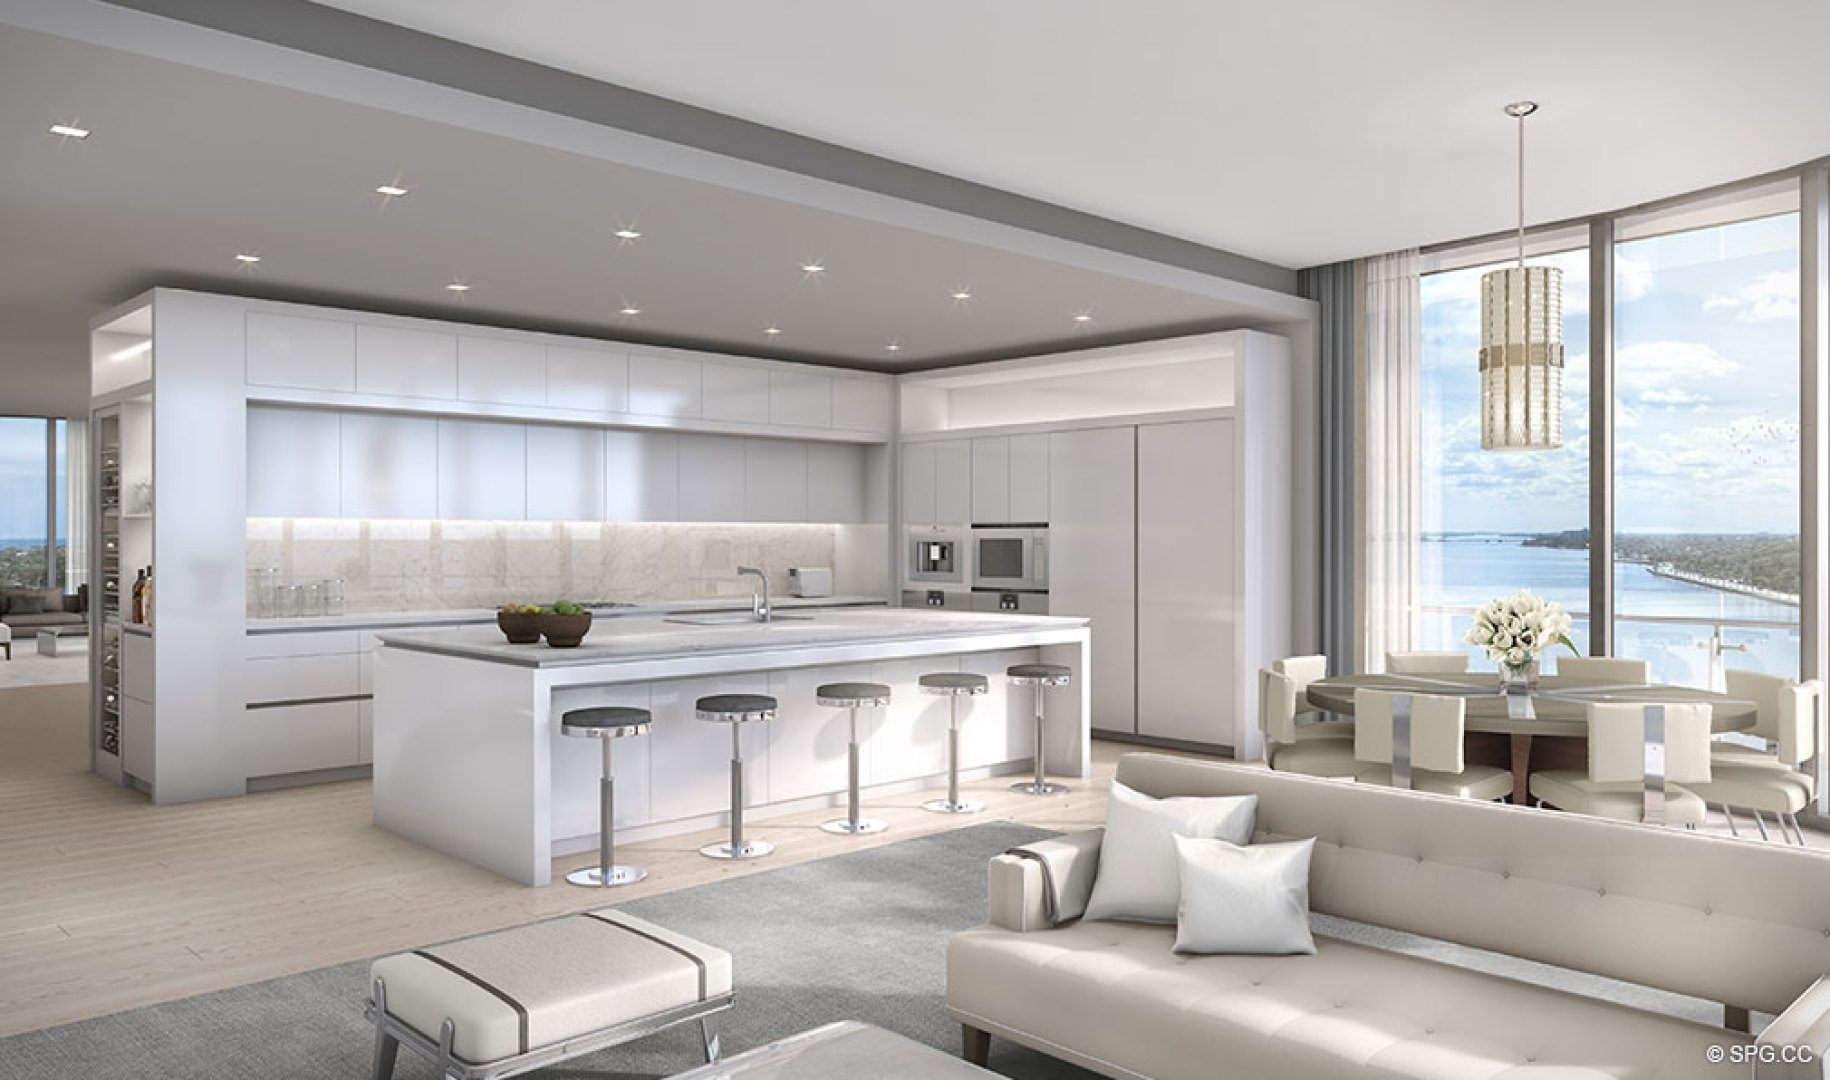 Open Kitchen Concept at The Bristol, Luxury Waterfront Condos in West Palm Beach, Florida 33401